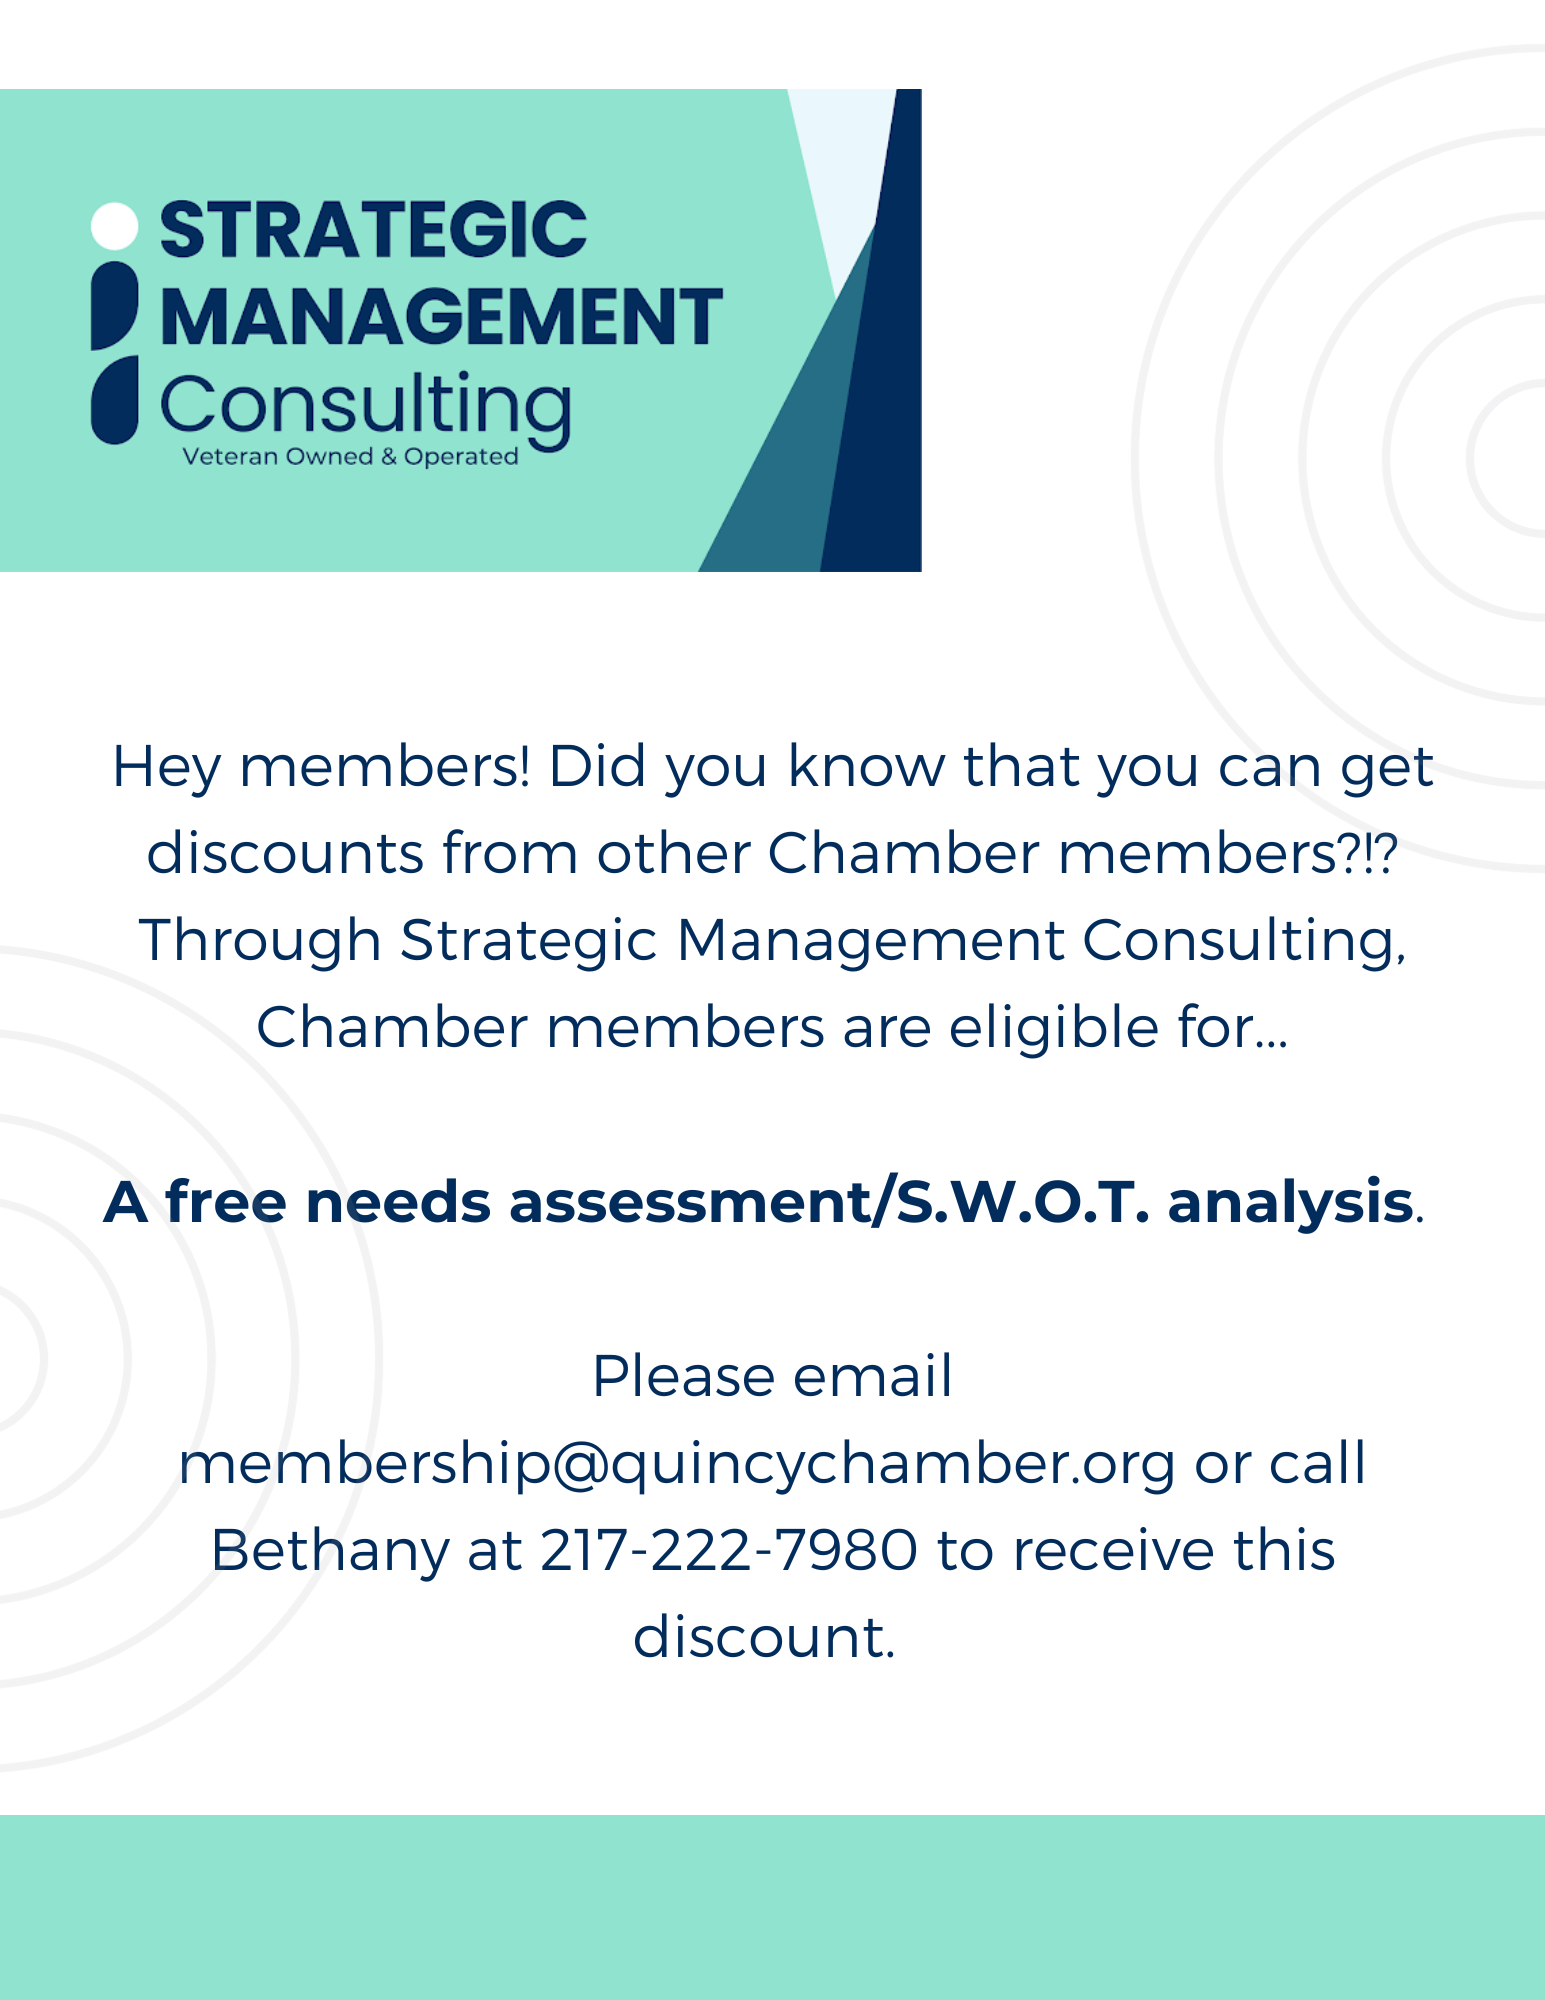 strategic management consulting flyer